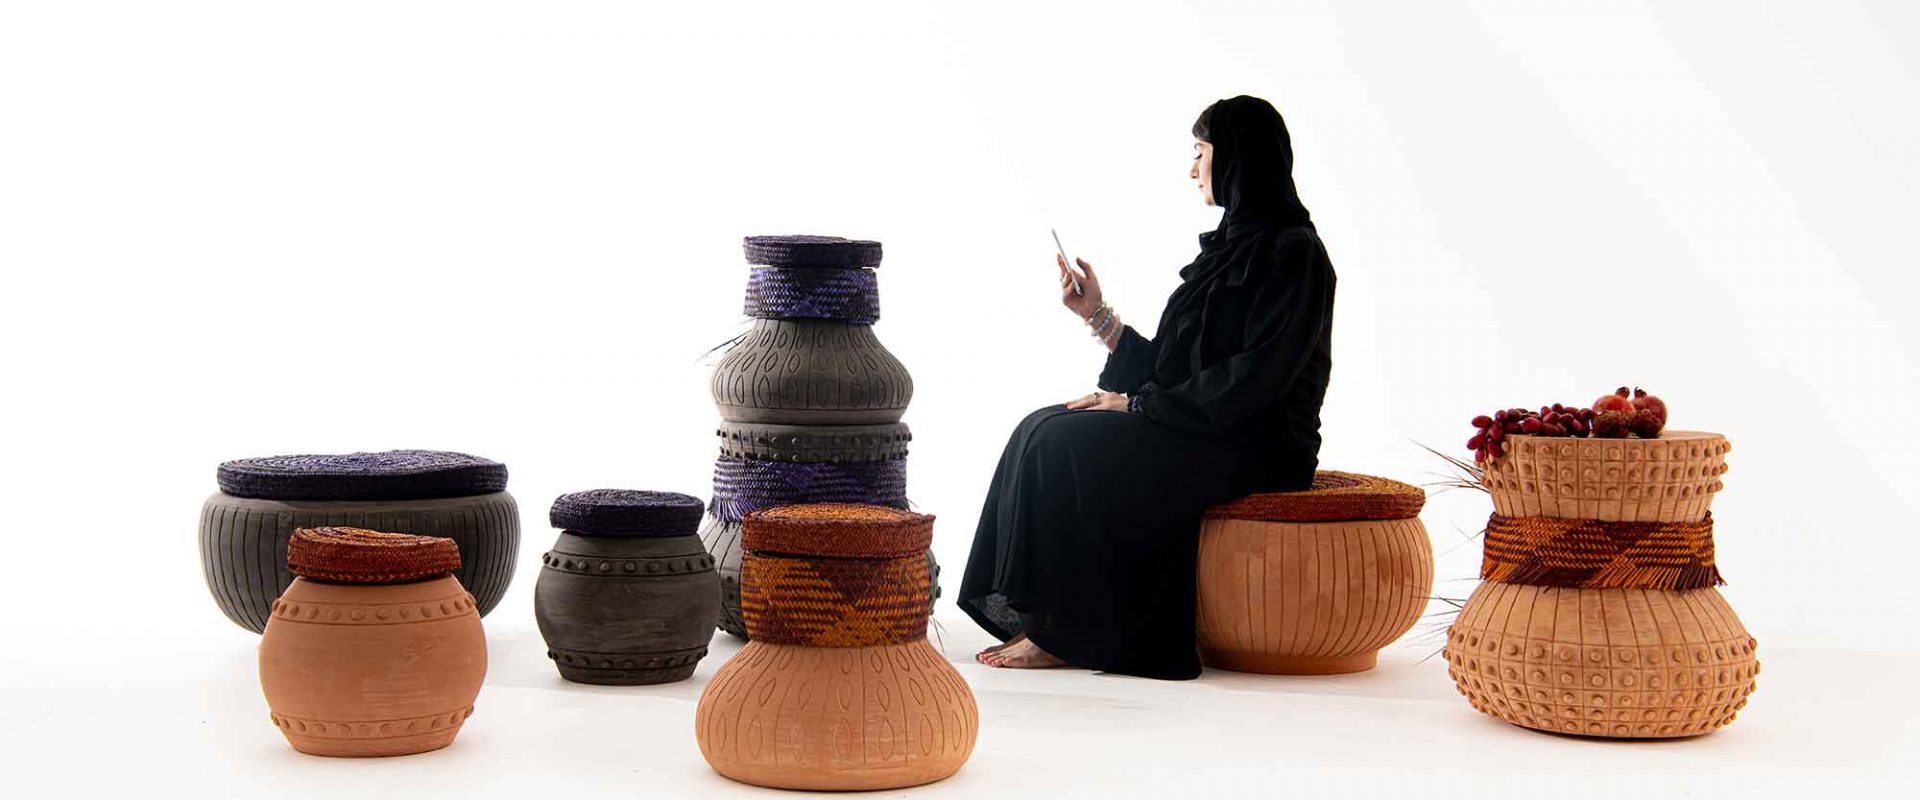 Irthi Contemporary Crafts Council